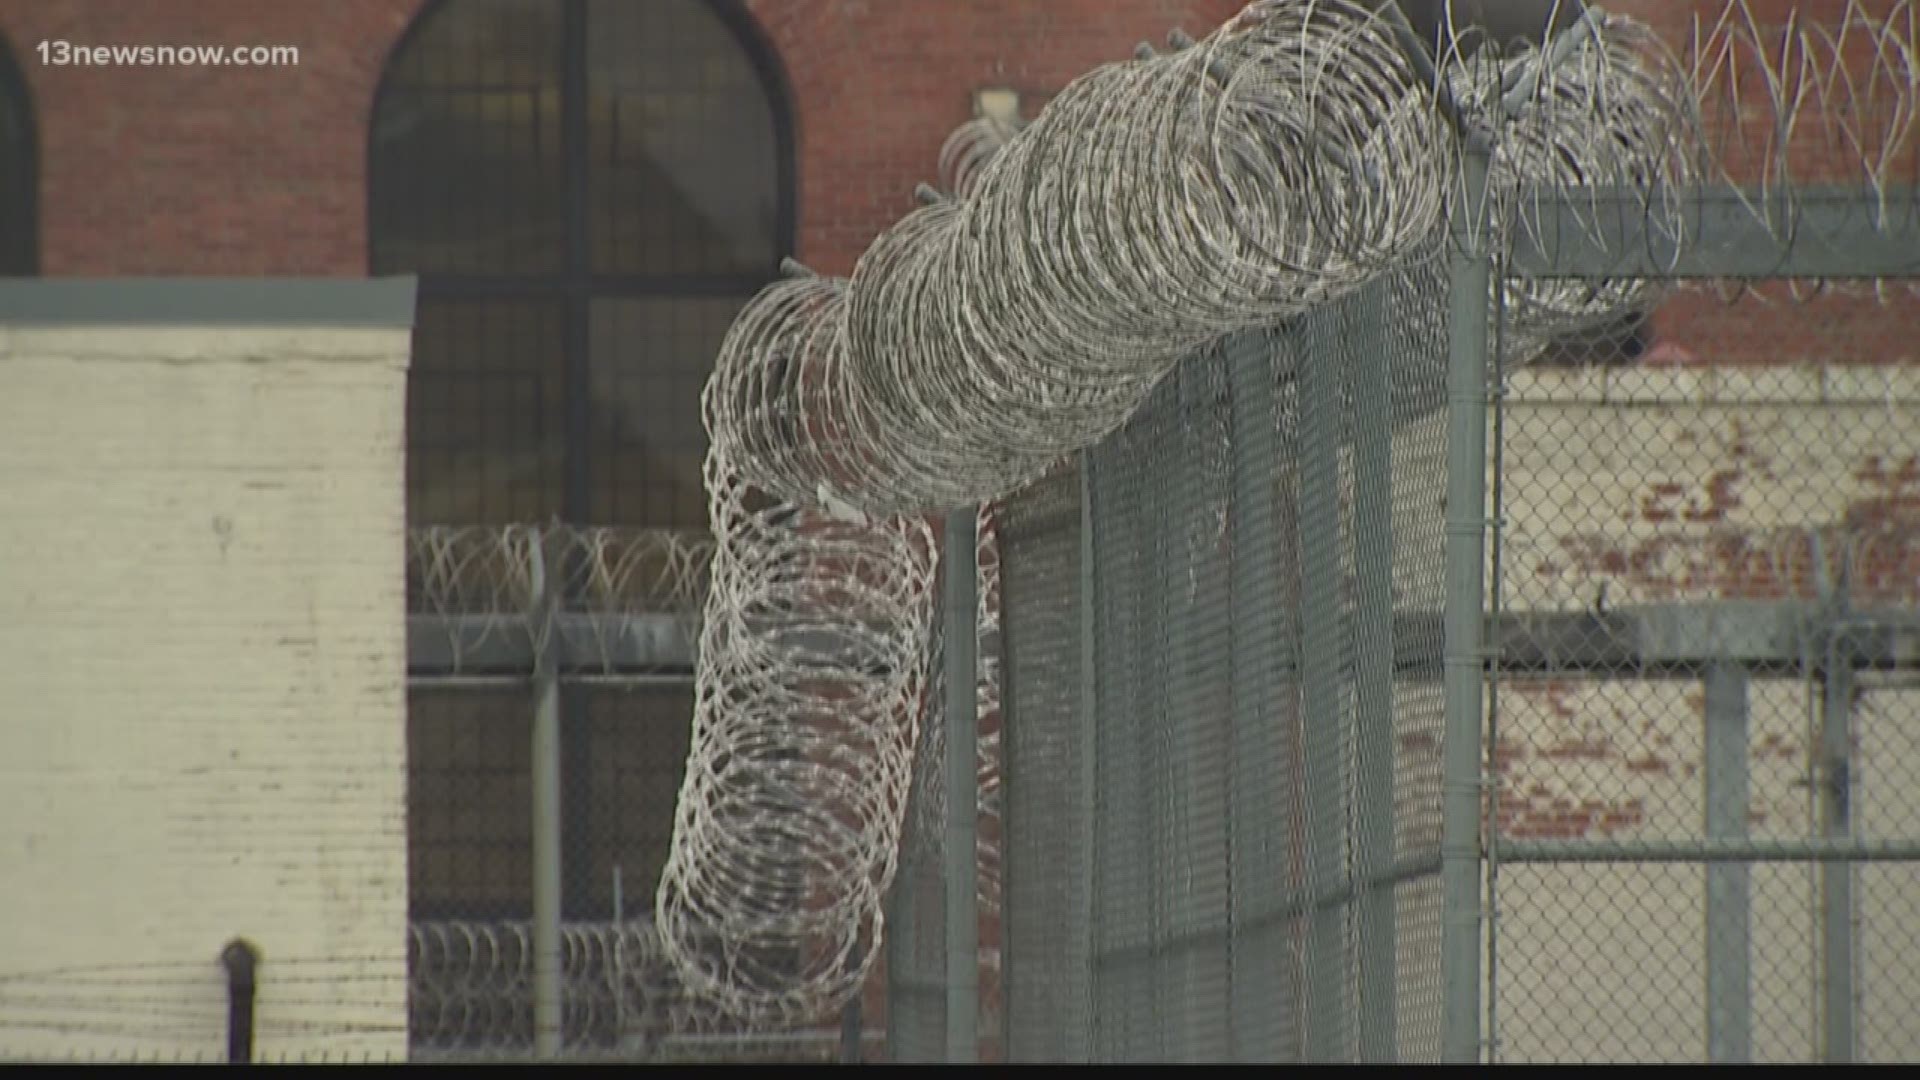 A debate over a new policy in Virginia's prisons.